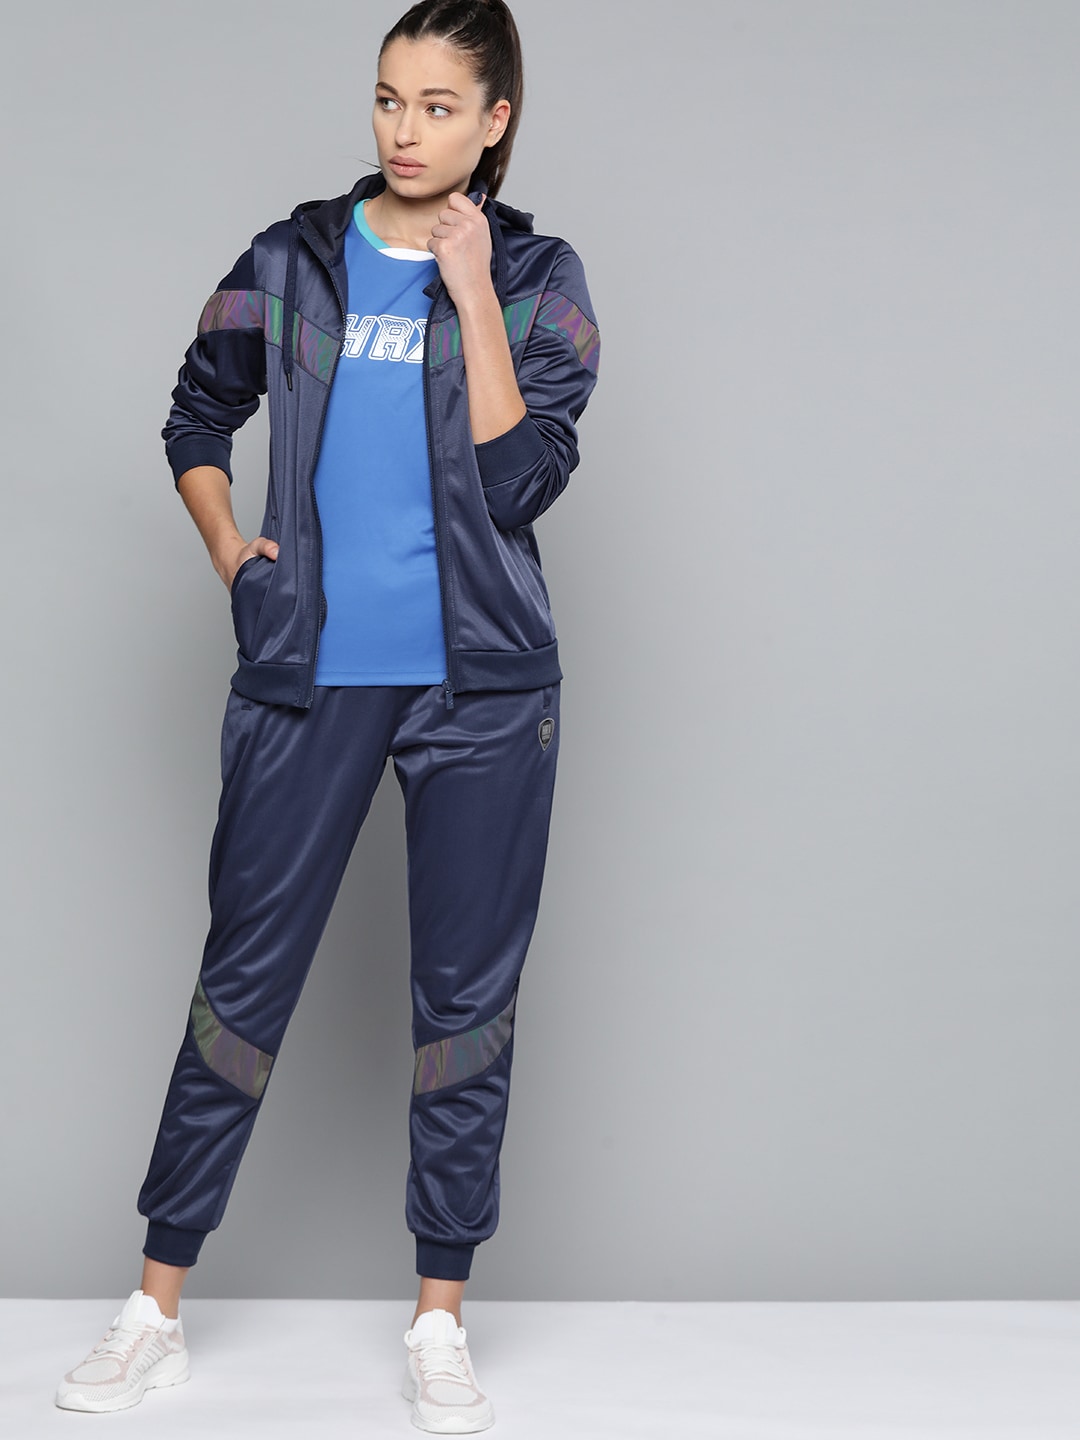 HRX by Hrithik Roshan Women Navy Blue Colorblocked Football Tracksuit Price in India